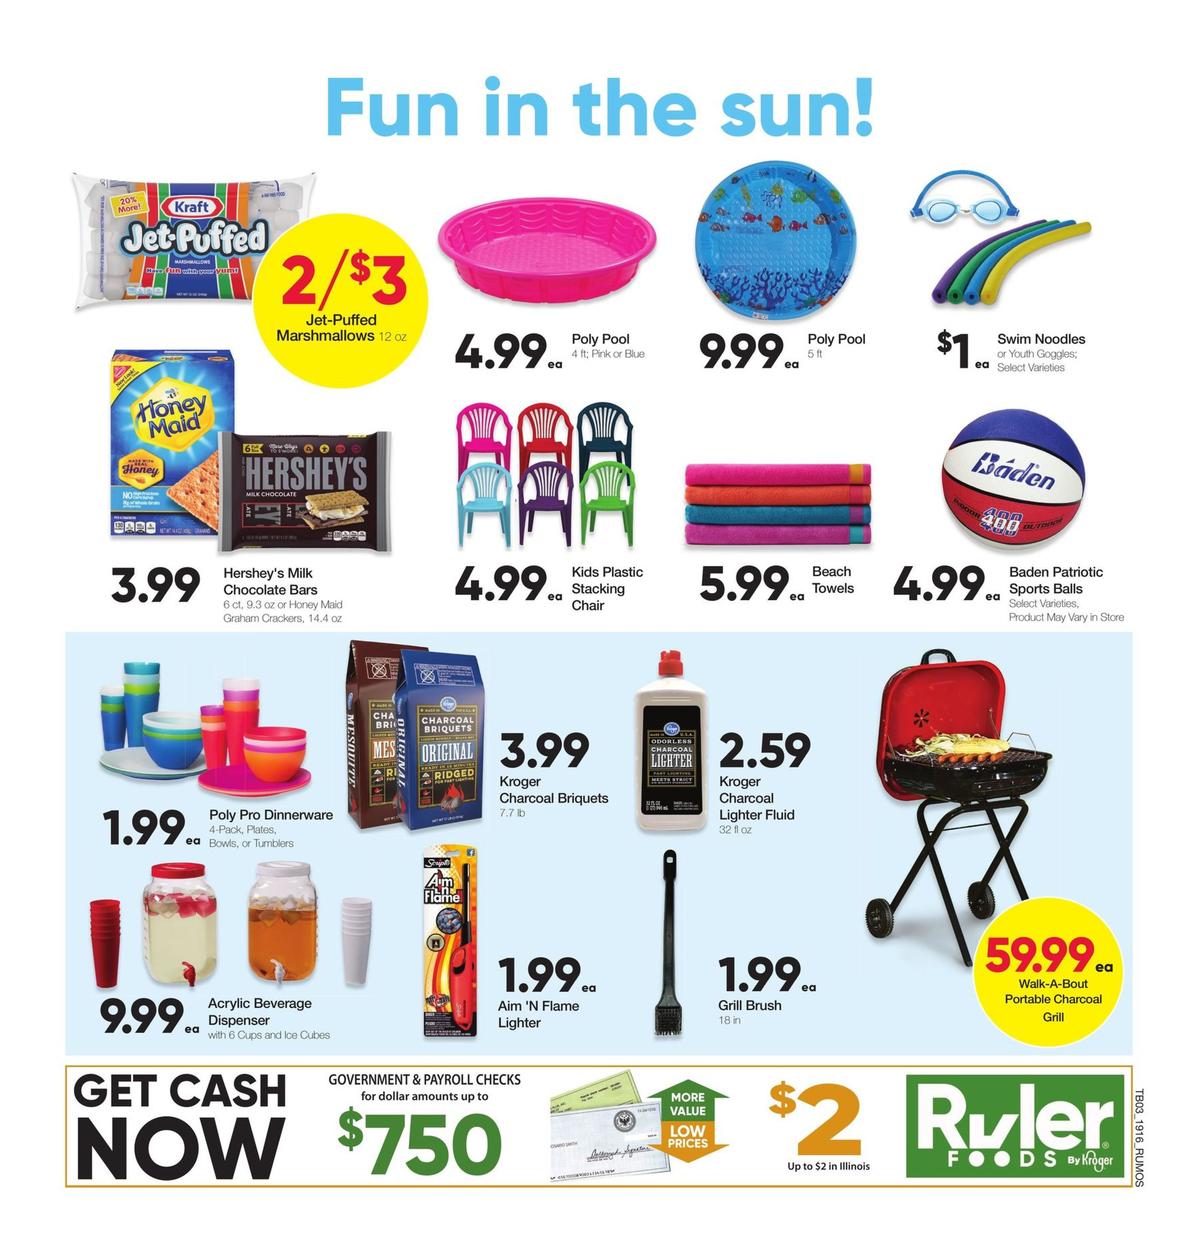 Ruler Foods Weekly Ad from May 23